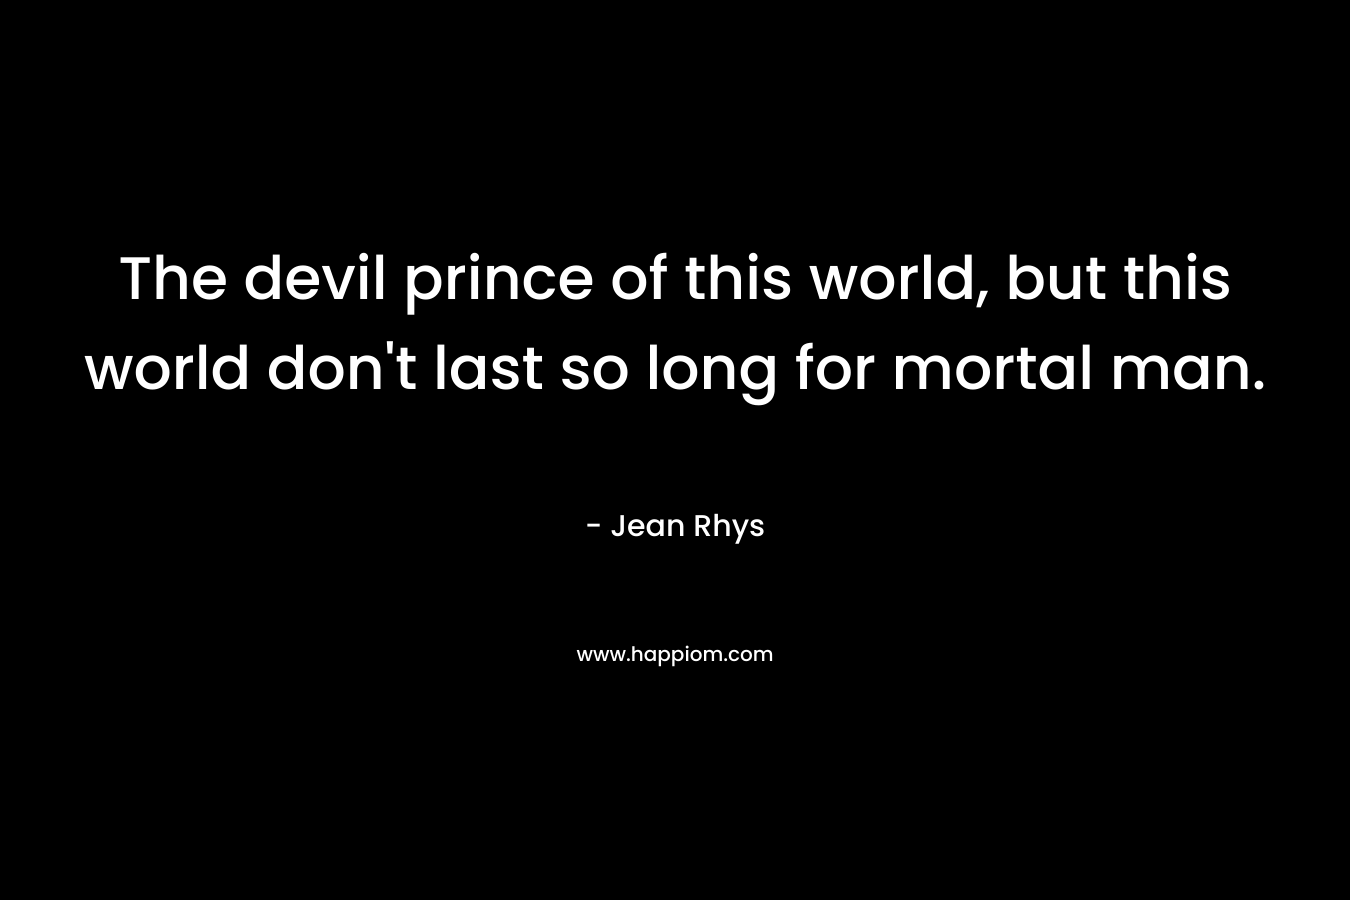 The devil prince of this world, but this world don't last so long for mortal man.